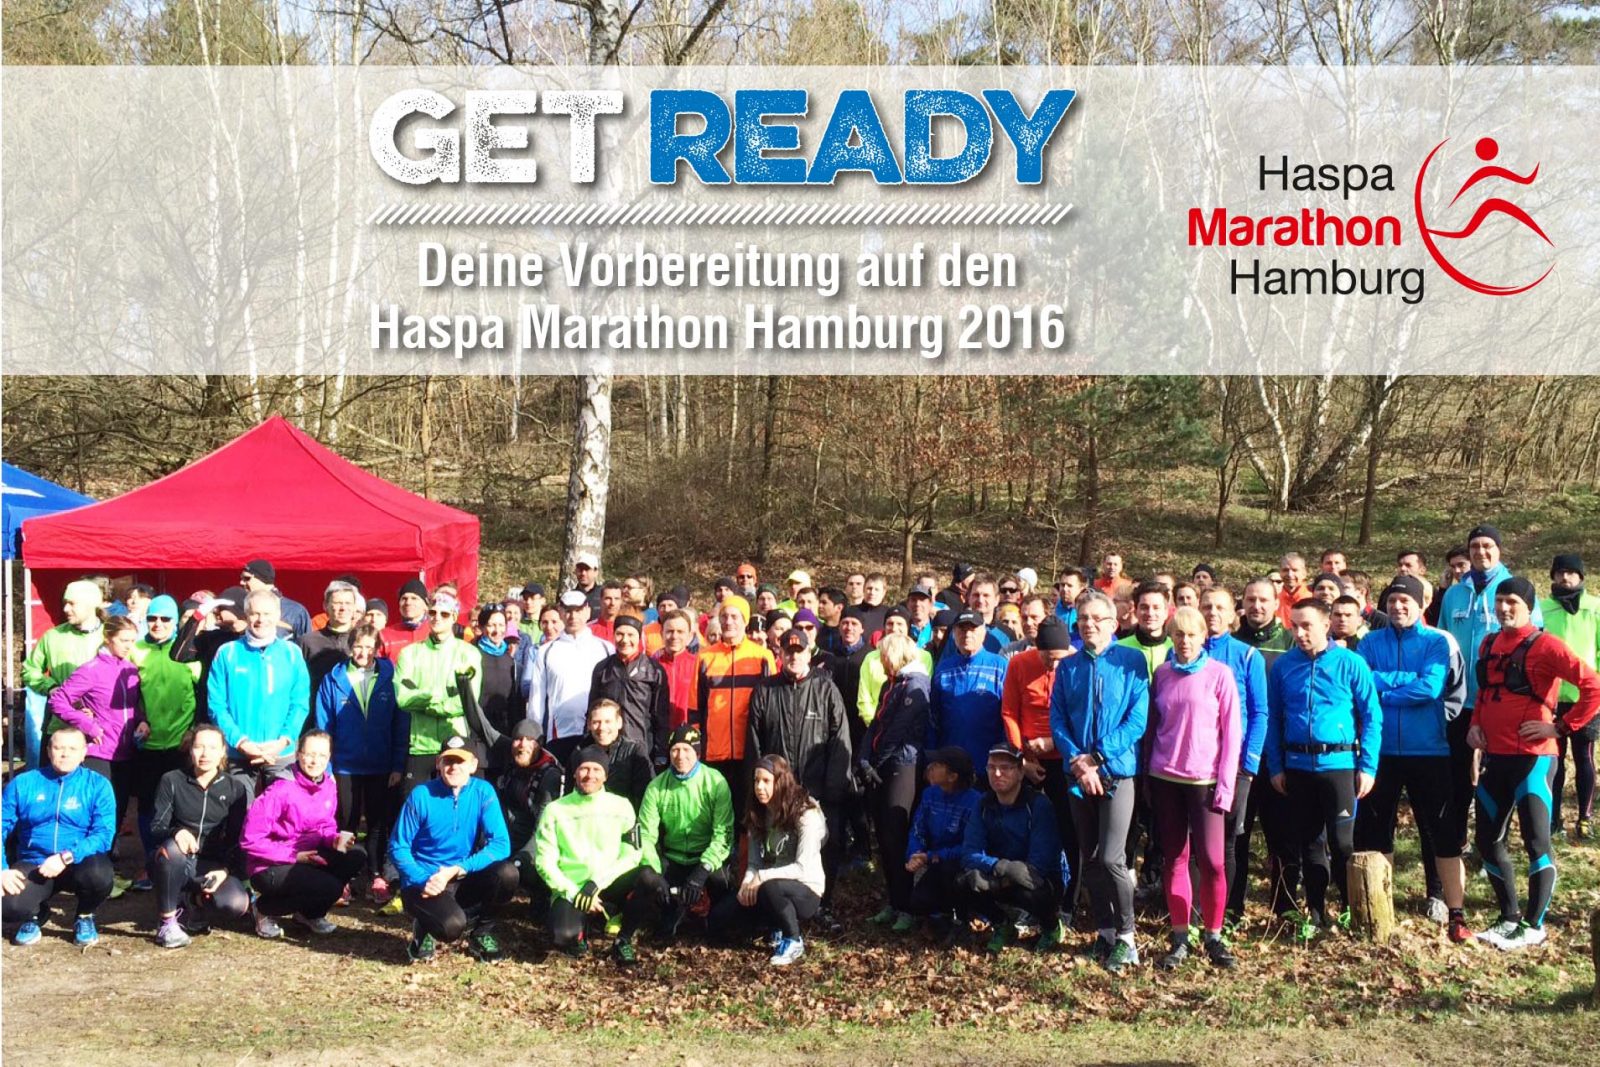 Join us on our 3rd “Get Ready” Training Run!